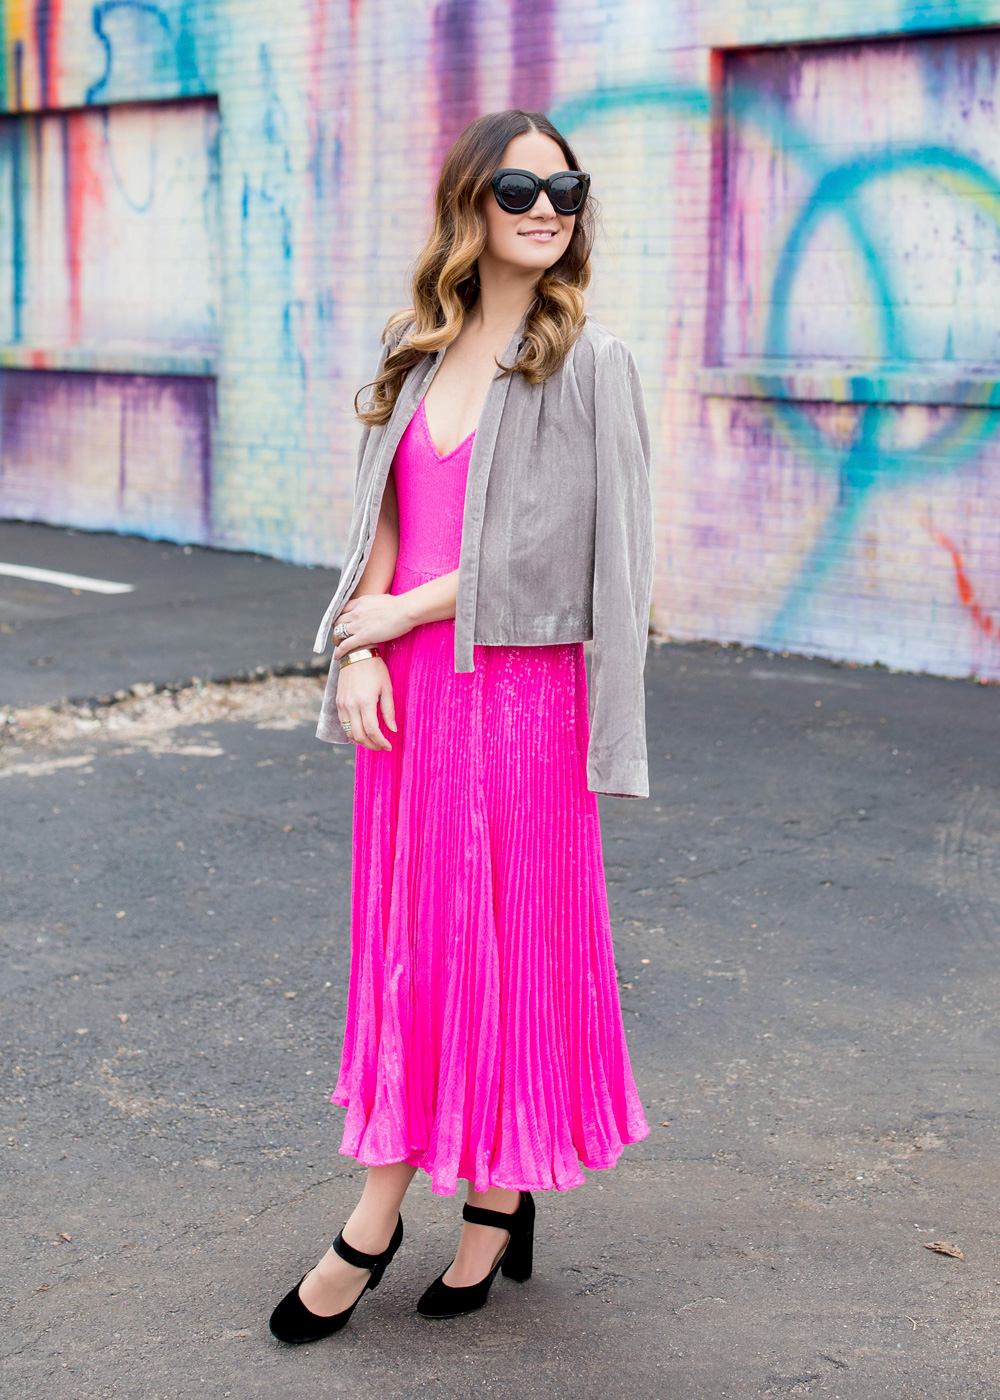 Topshop Pink Sequin Pleated Dress